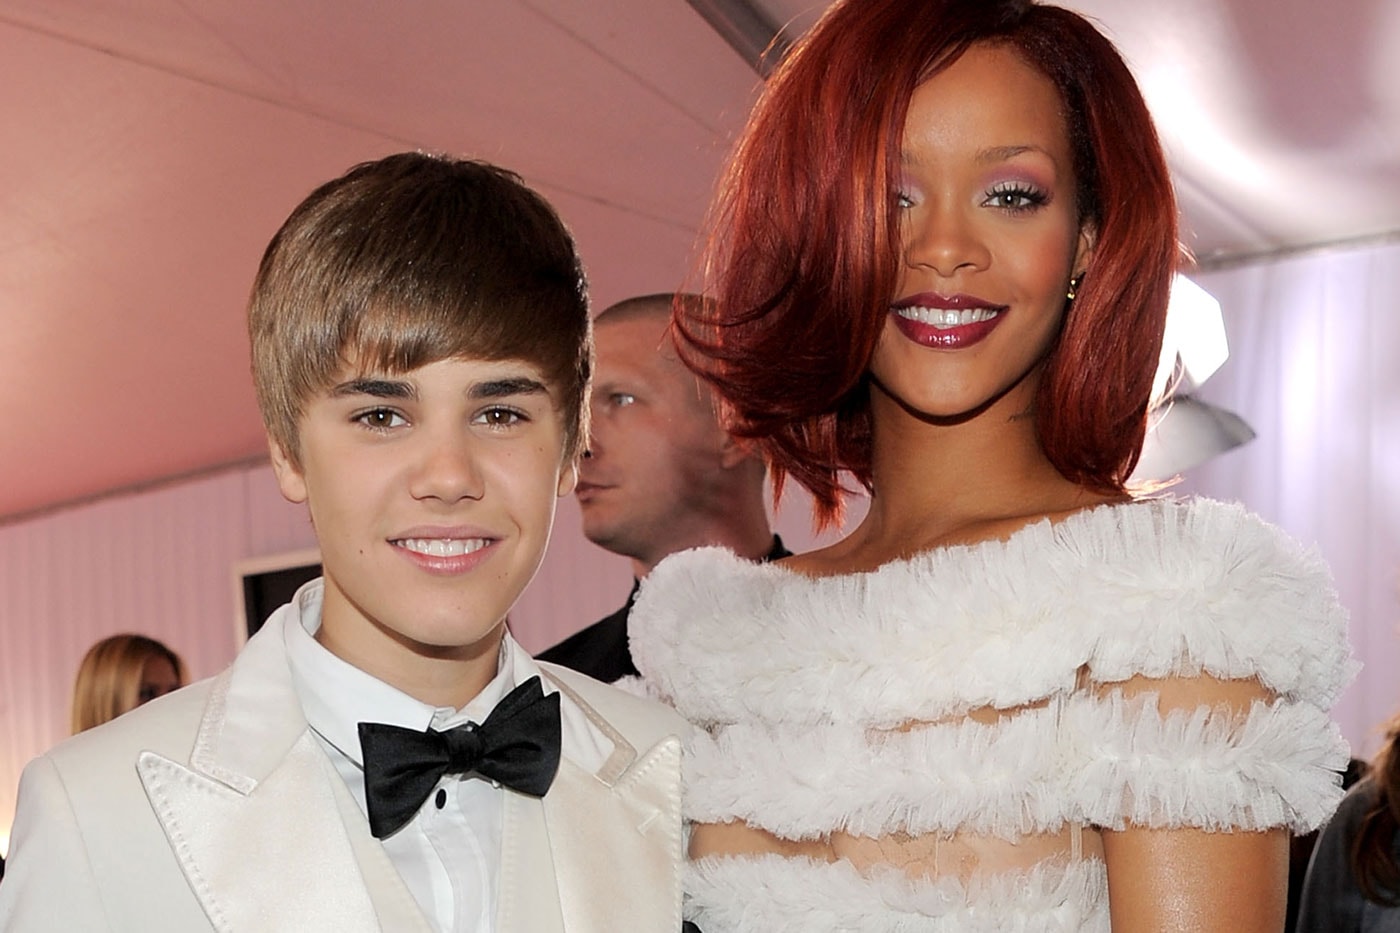 Thrasher Wants Justin Bieber and Rihanna to Stop Wearing Their Clothes